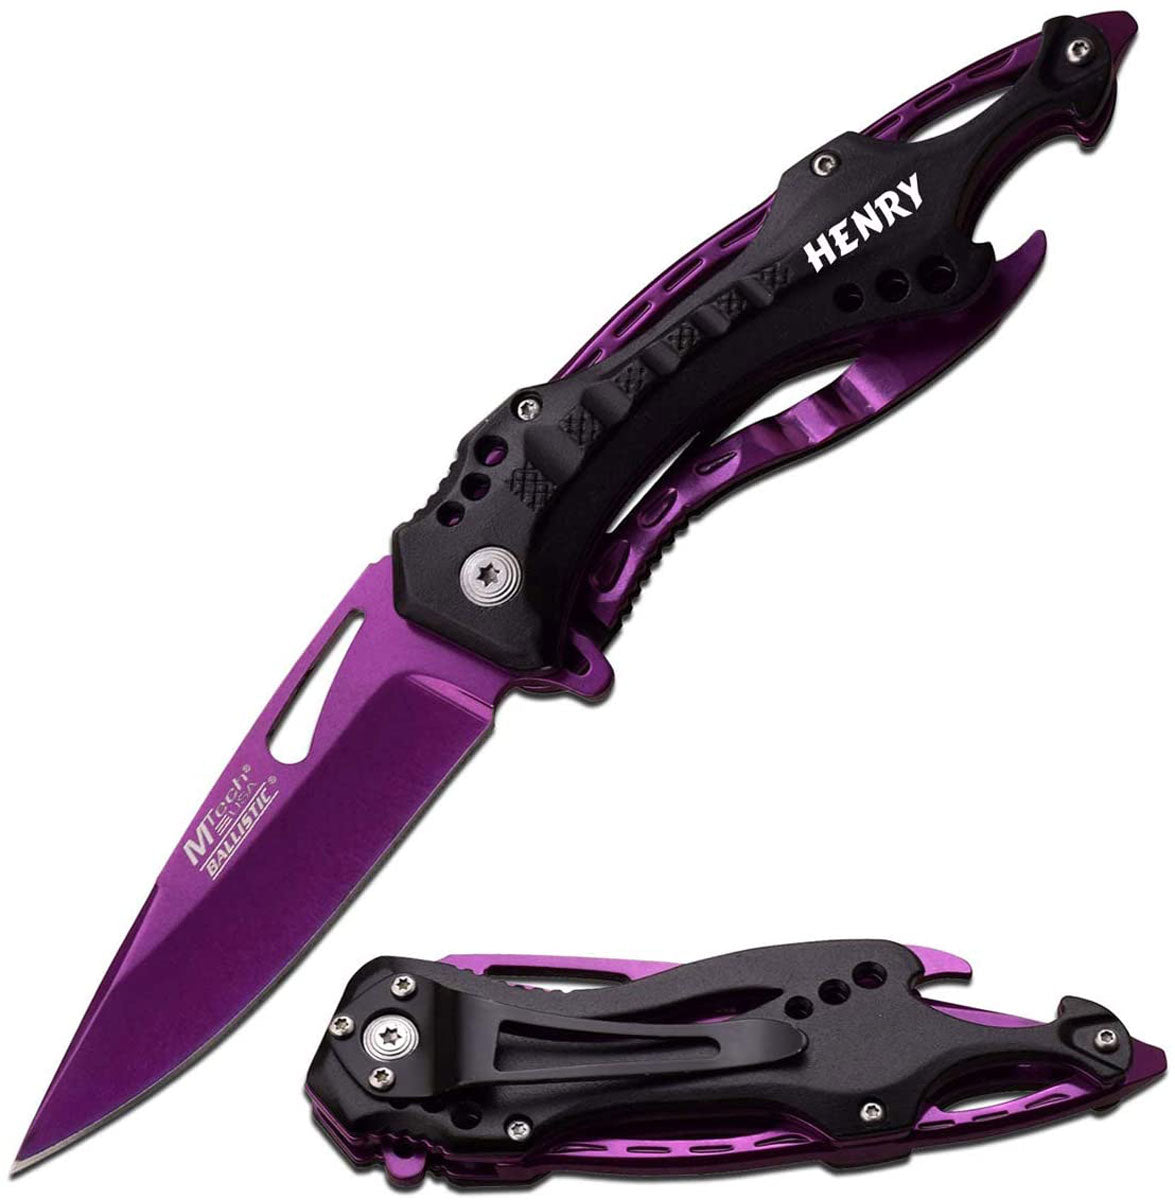 GIFTS INFINITY 4.5" Closed Personalized Engraved Folding Pocket Knife, Purple Stainless Steel Tactical Blade Knife with Black Handle